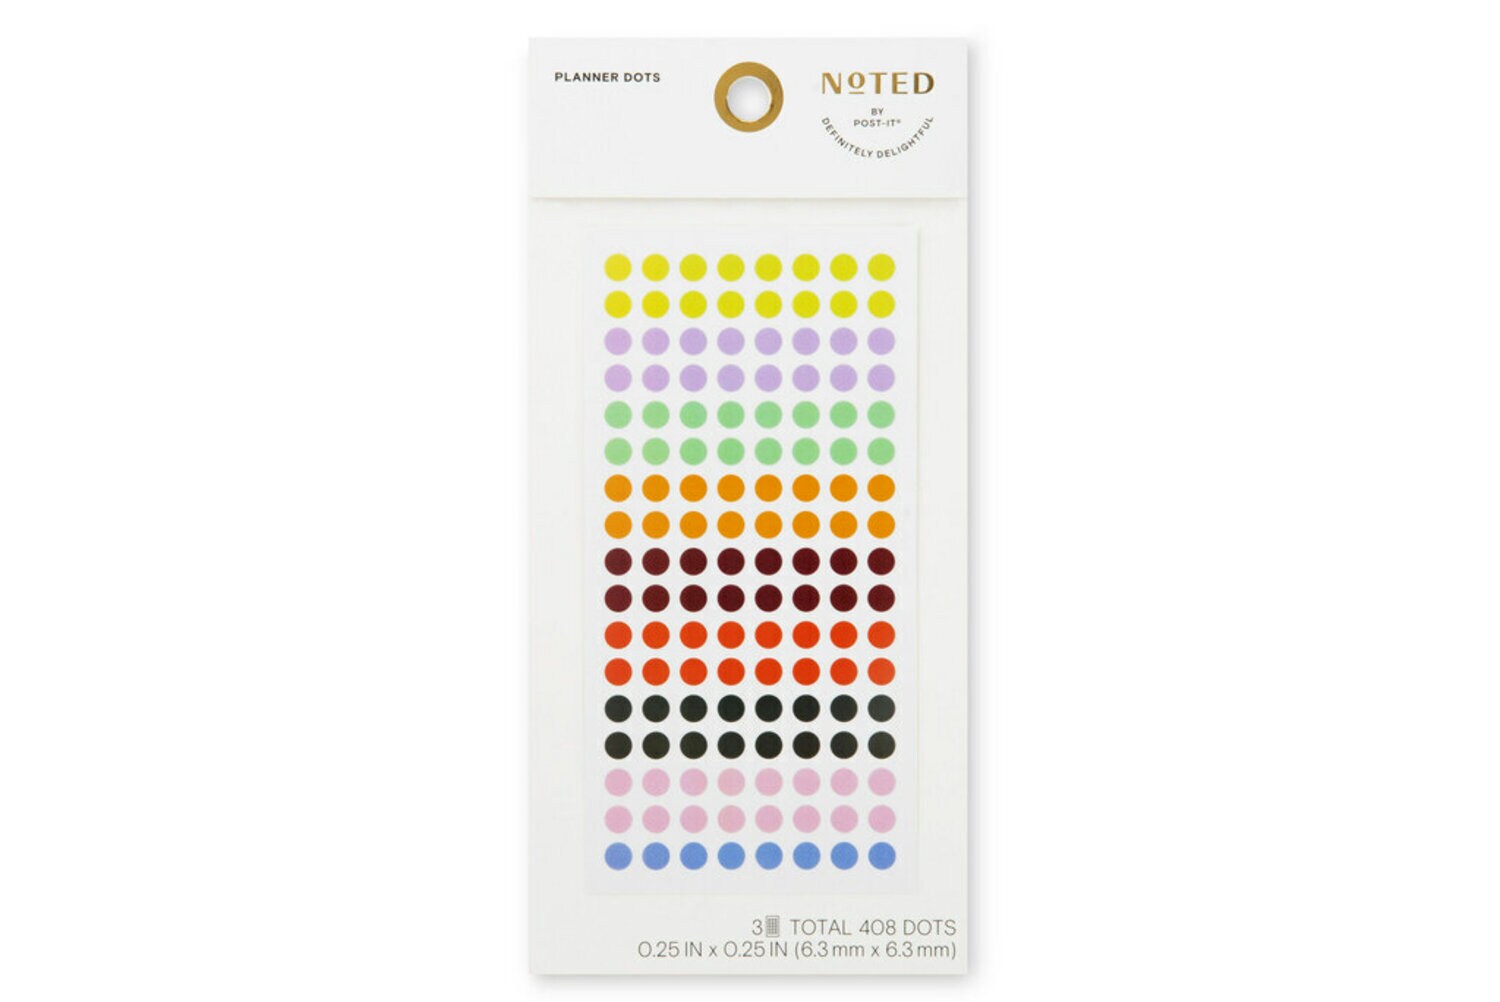 7100256644 - Post-it Planner Dots NTD-PD-MIX, .25 in x .25 in (6.3 mm x 6.3 mm)